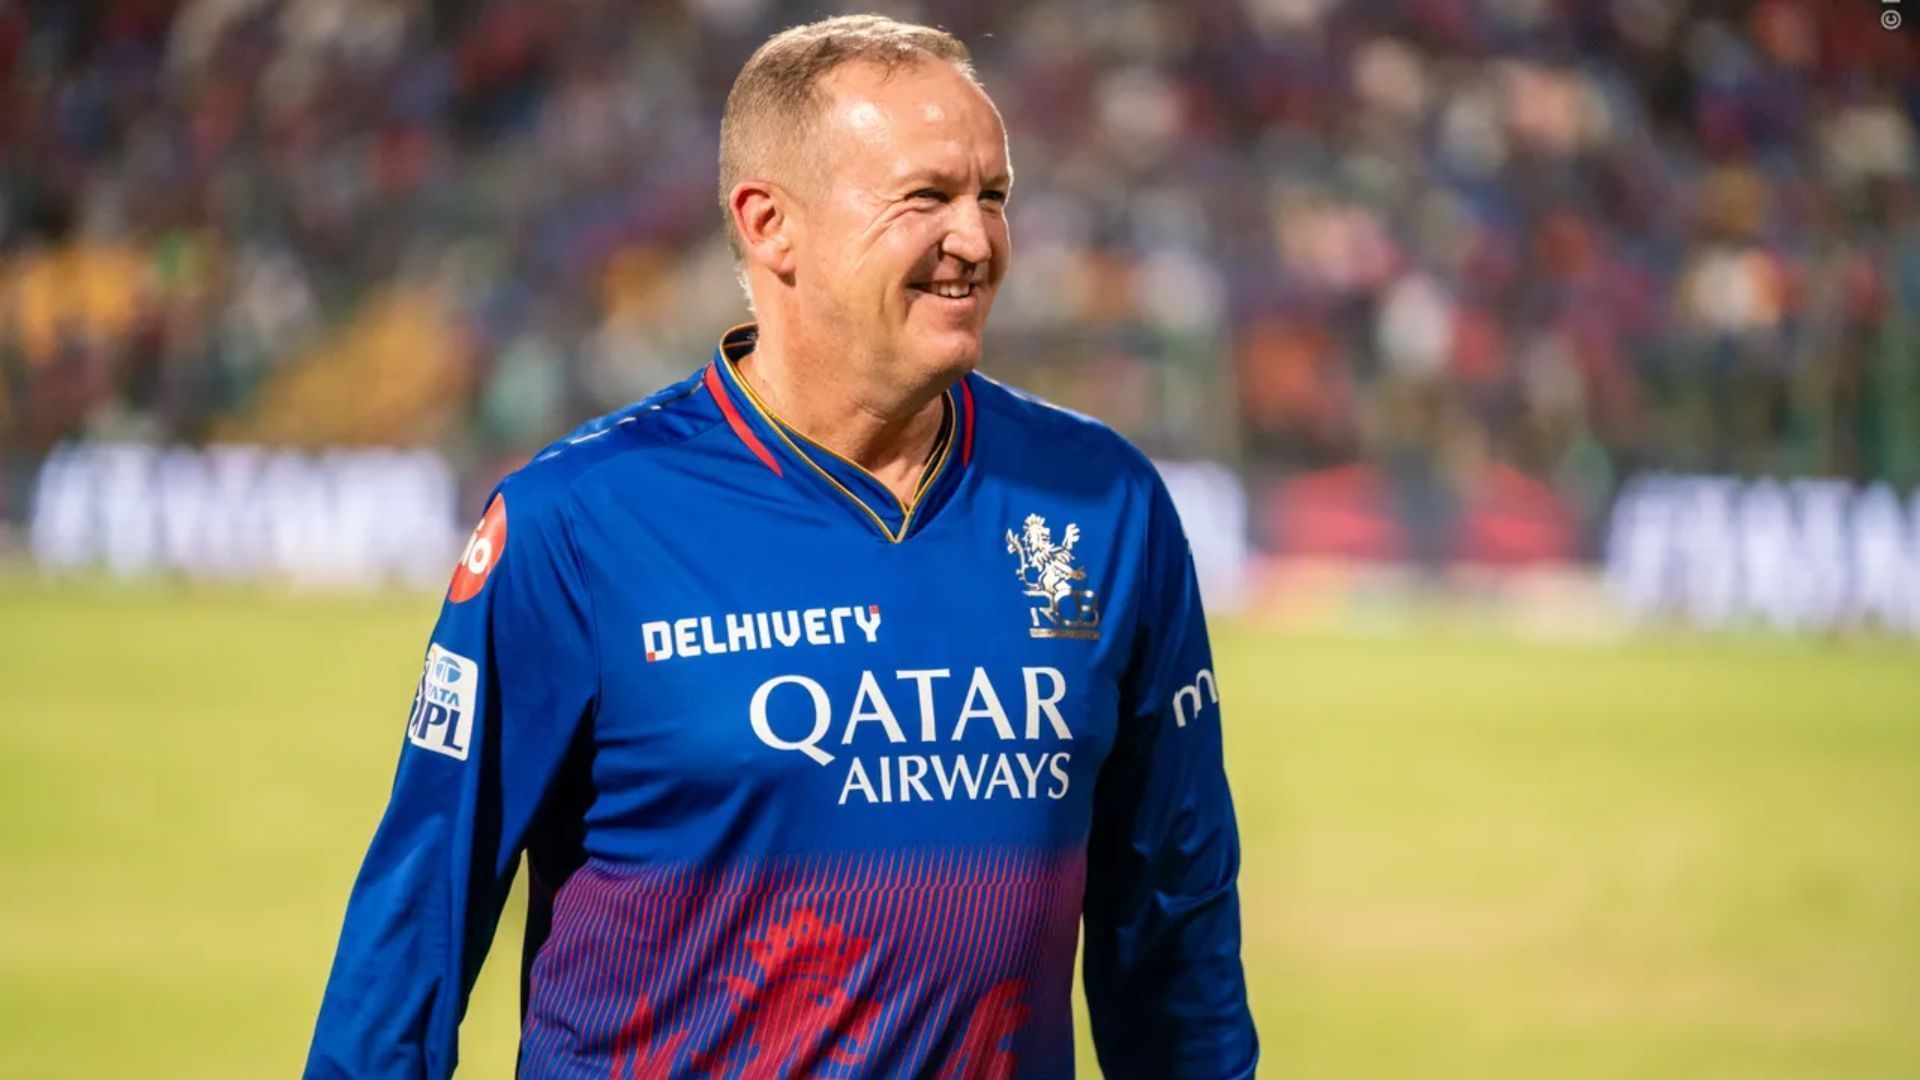 Andy Flower has tasted great success in franchise cricket and wants to continue in the same field (P.C.:iplt20.com)